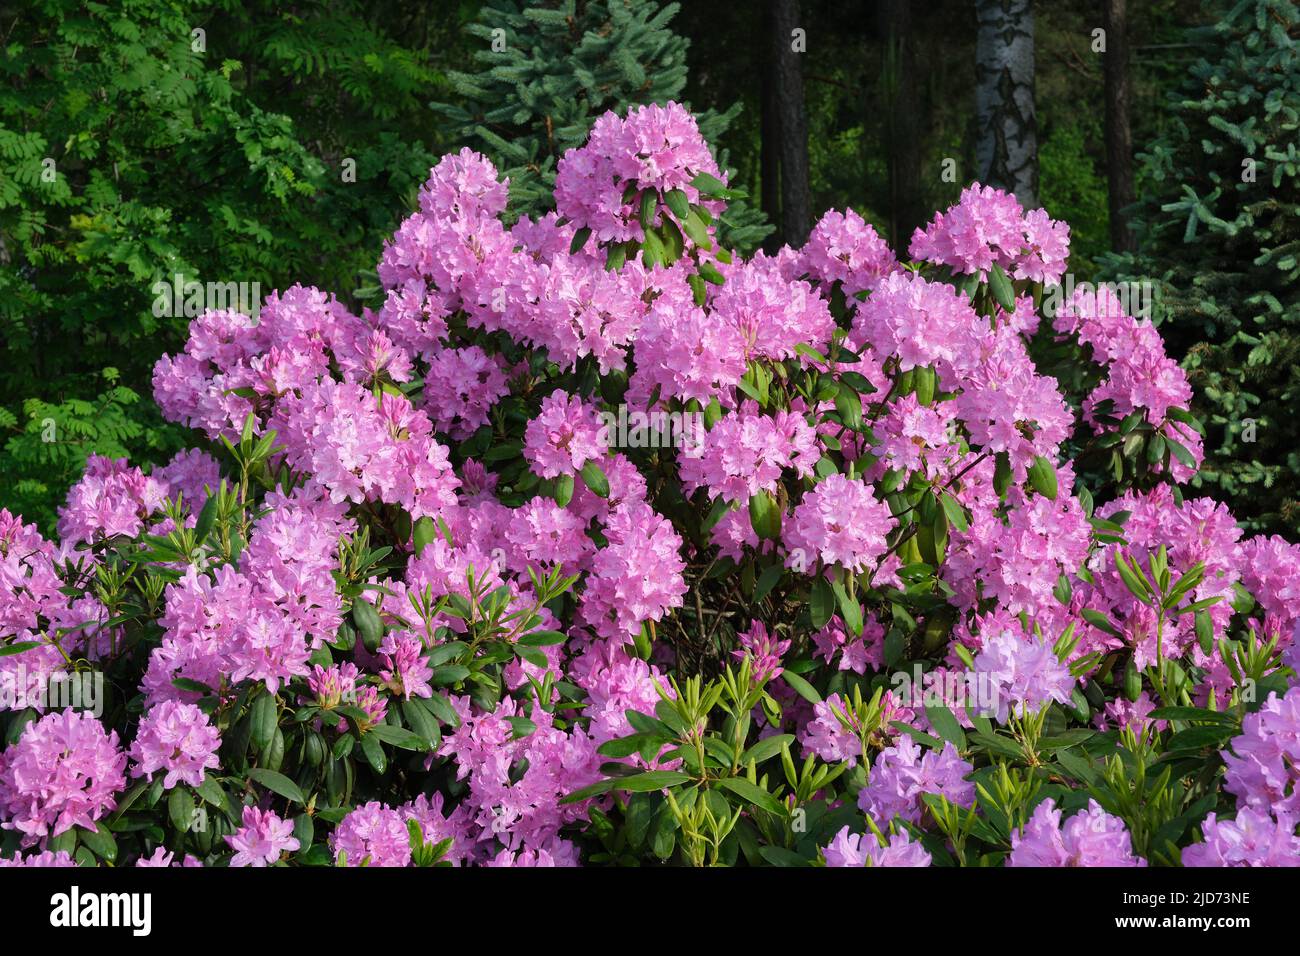 Beautiful lushly blooming Rhododendron. Hybrid Rhododendron bush in summer garden. Stock Photo